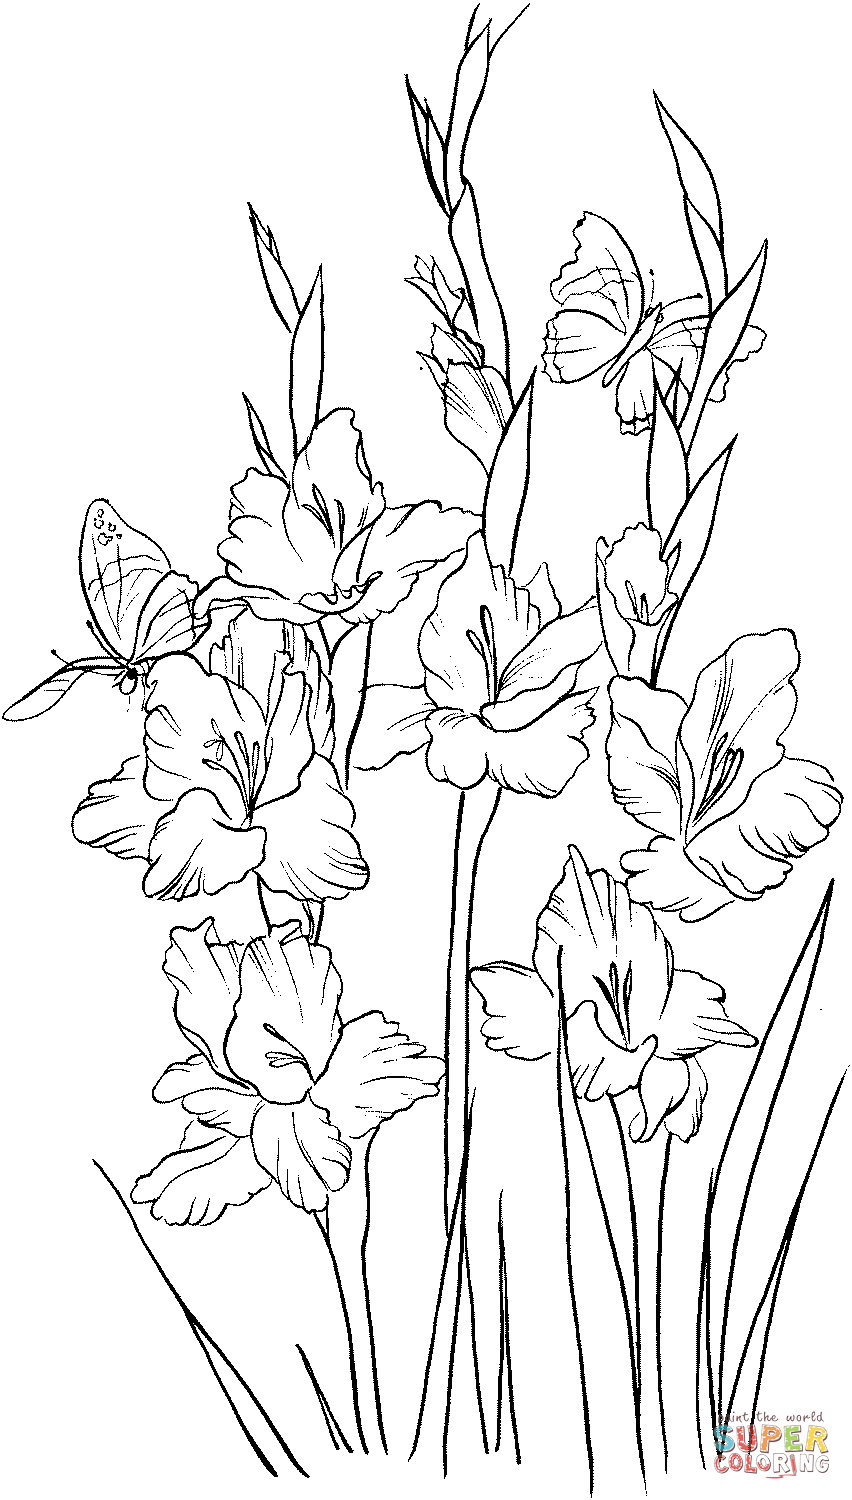 The best free Gladiolus drawing images. Download from 81 free drawings